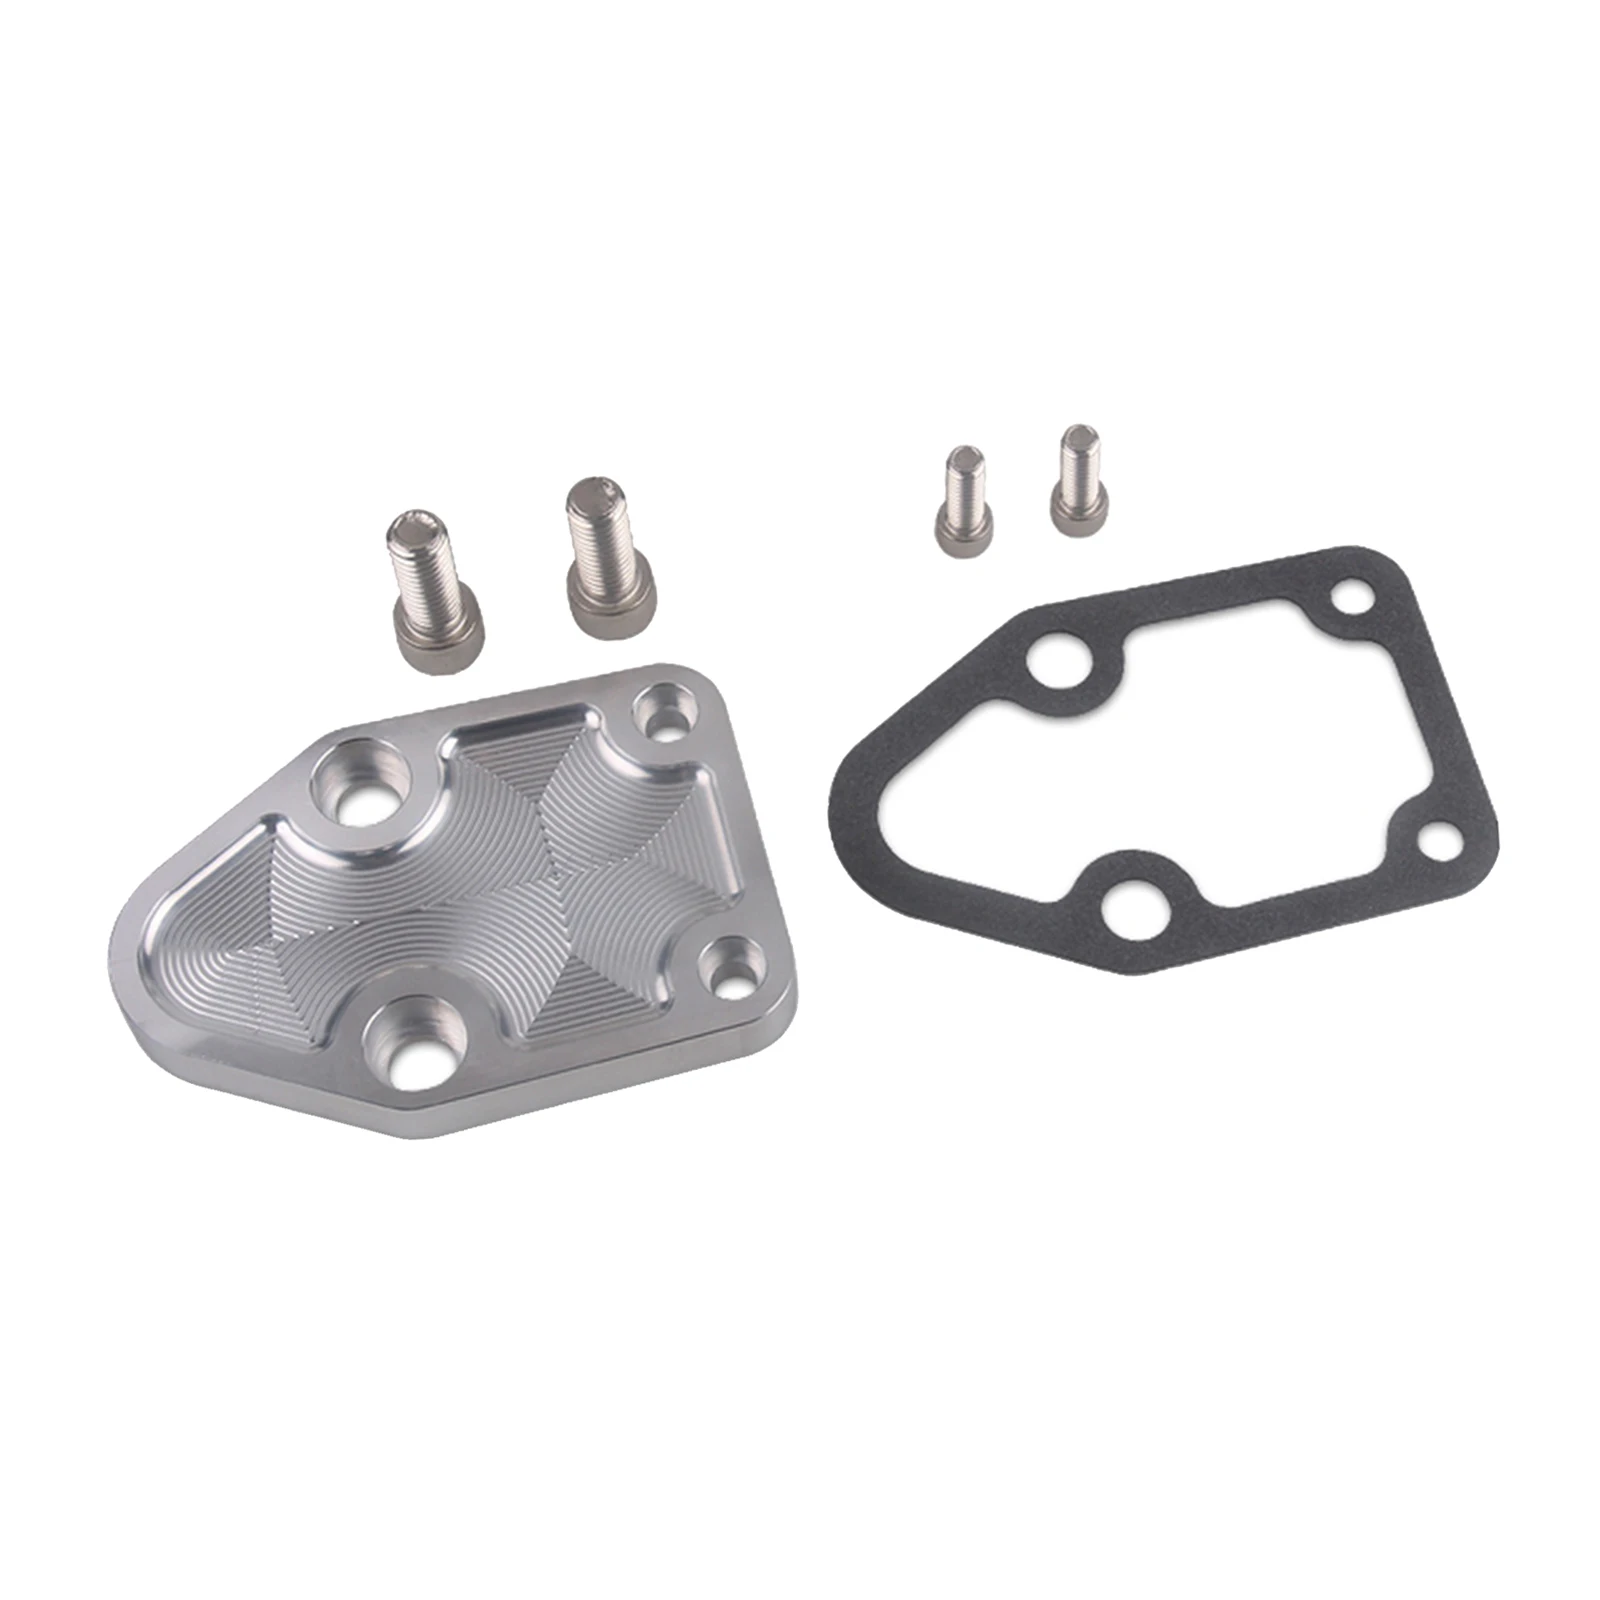 Fuel Pump Mounting Plate Kit Replacement for CHEVY 283 305 327 350 383 400